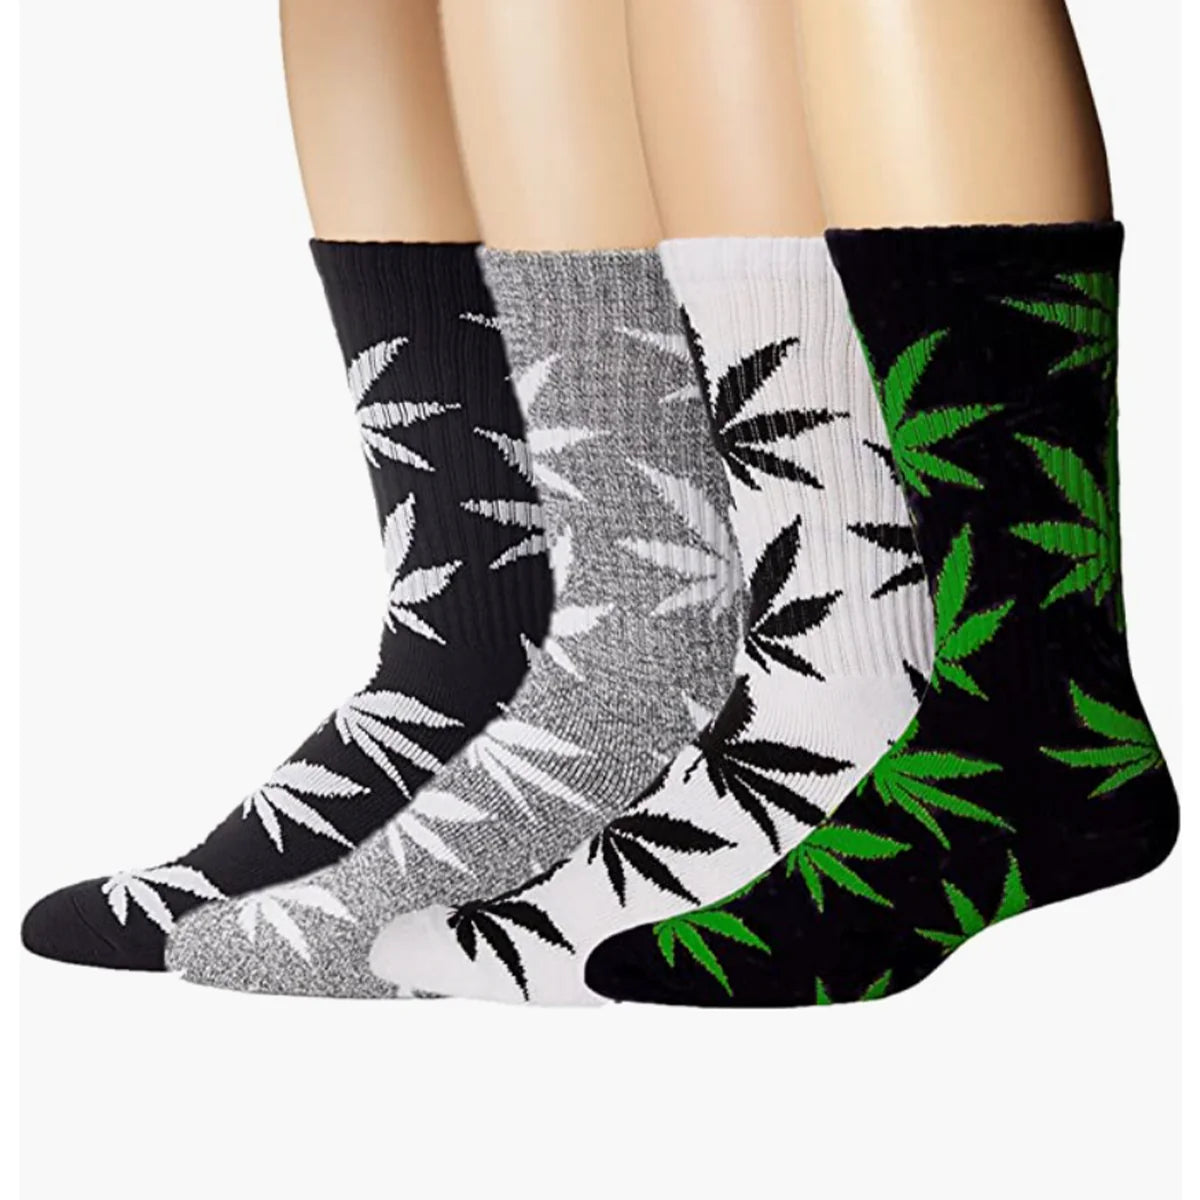 Weed Socks One Size fits All